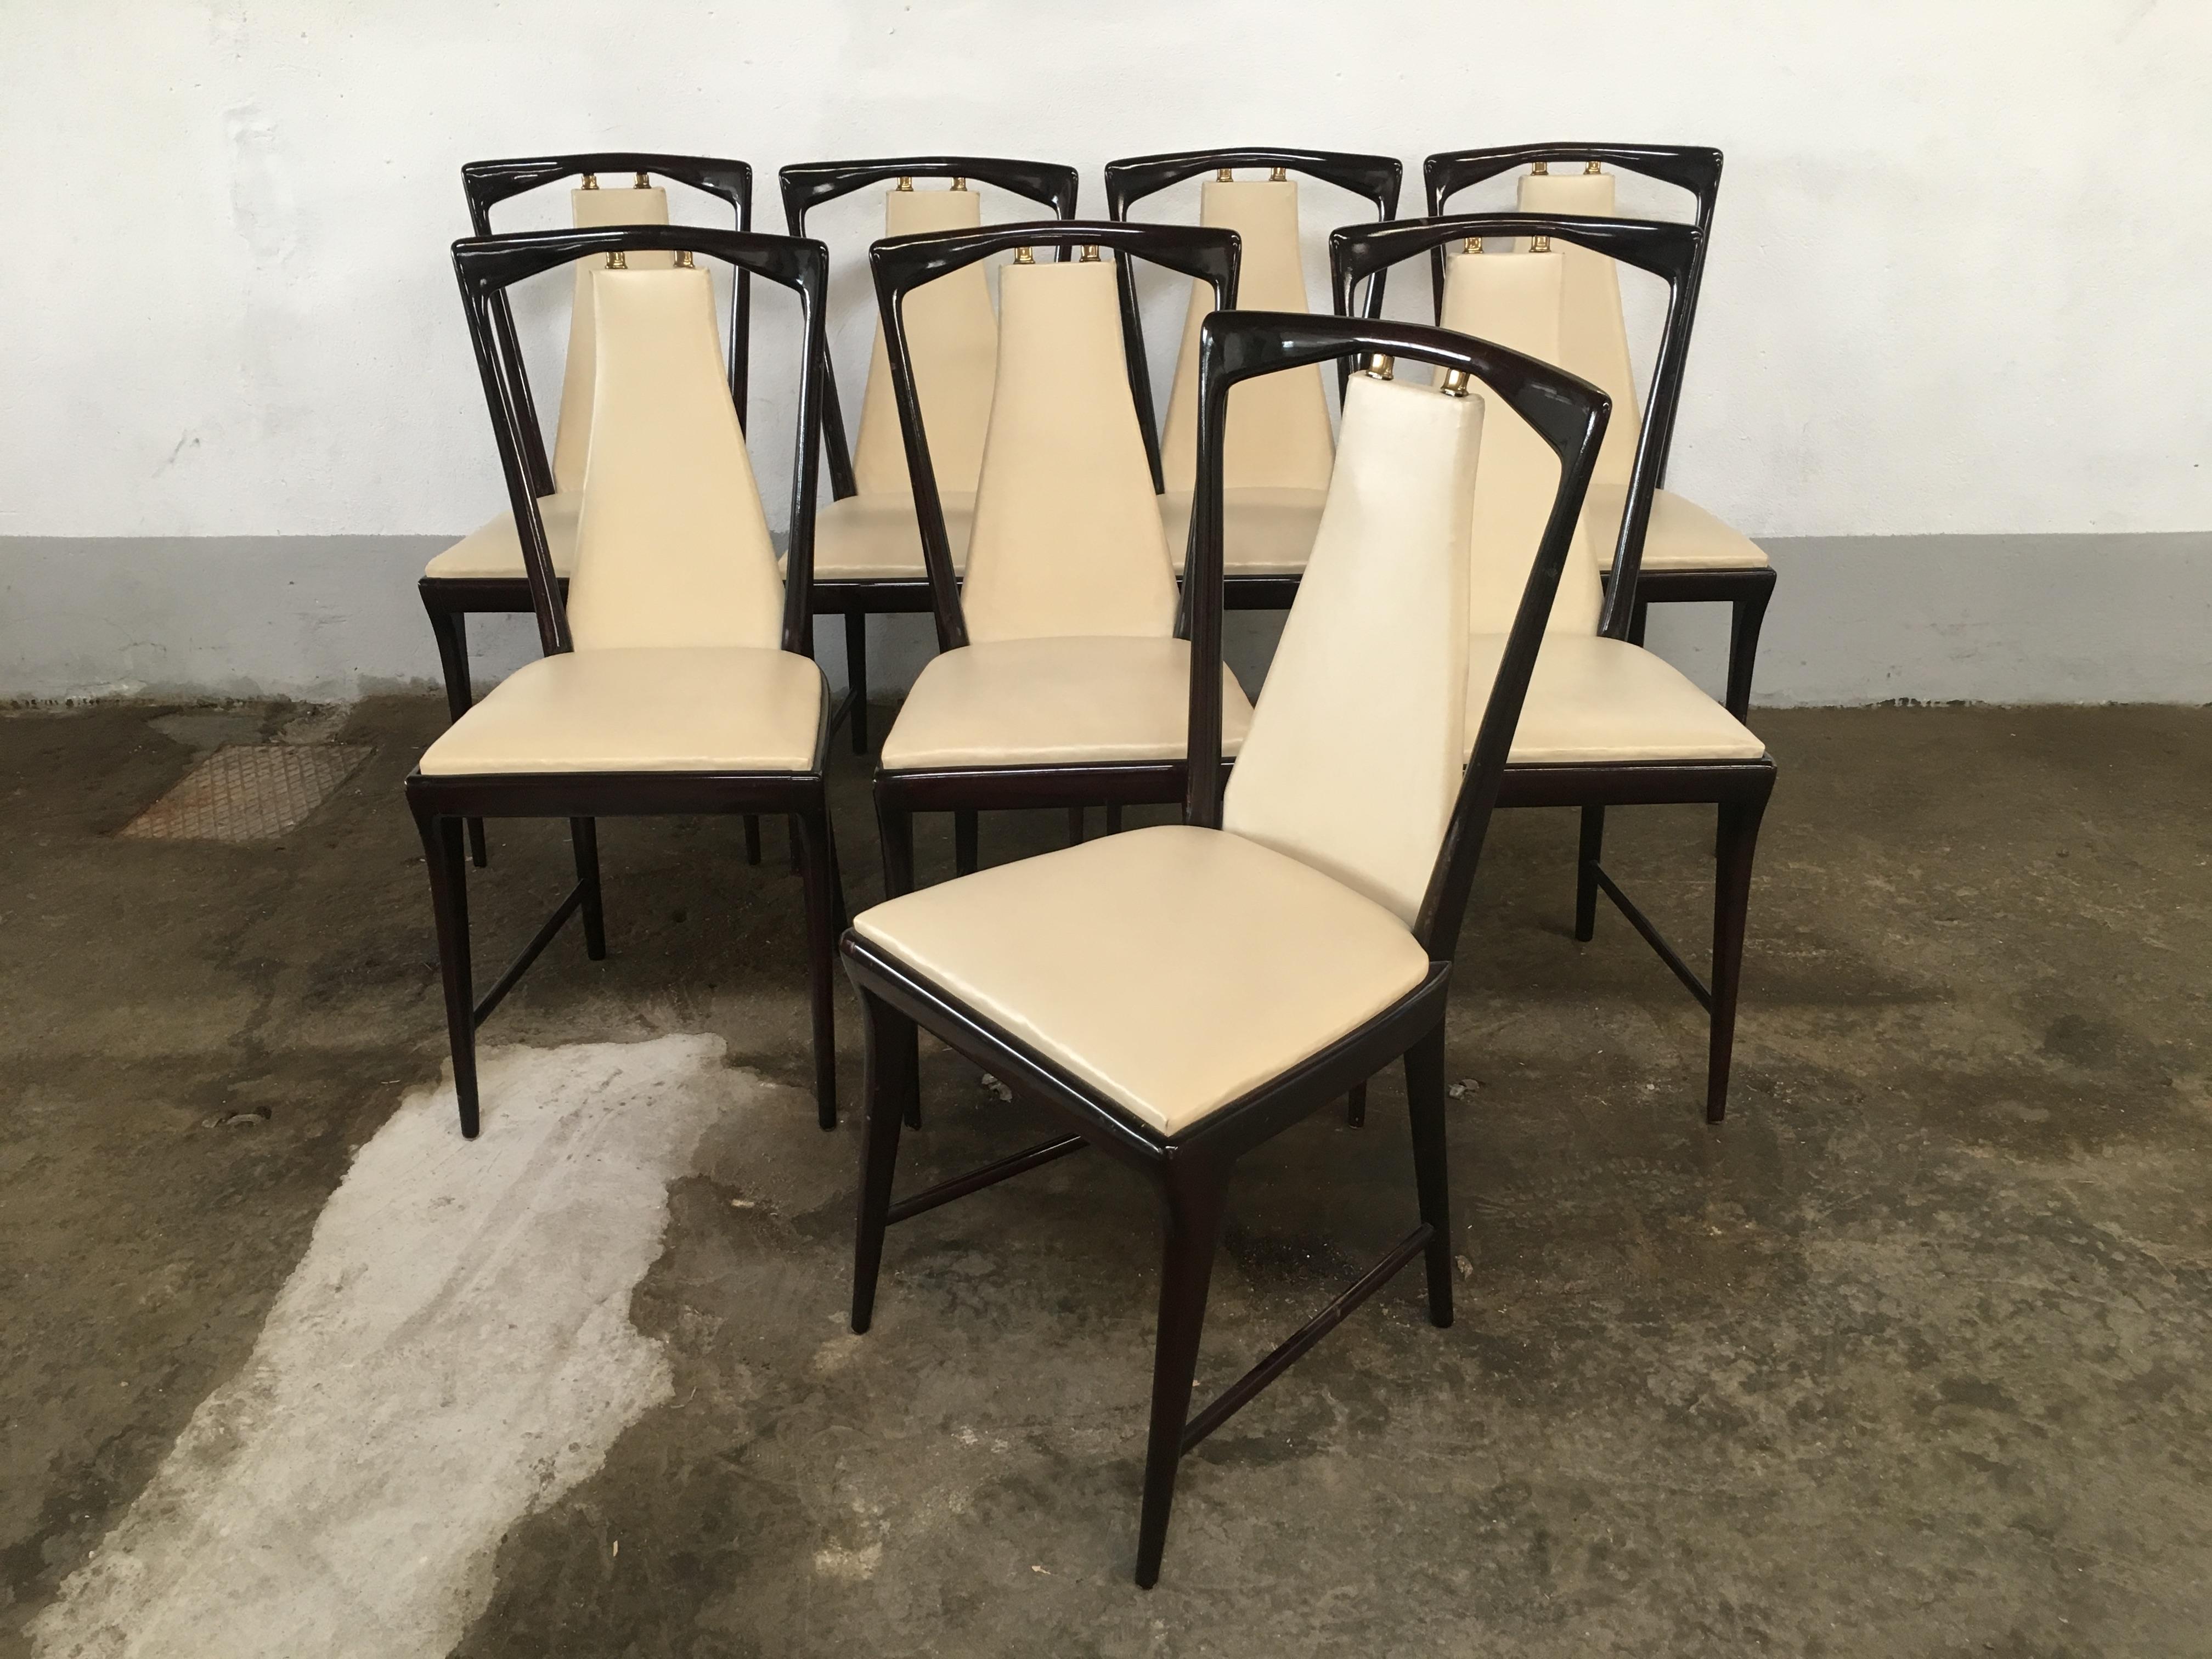 Mid-Century Modern set of 8 Osvaldo Borsani mahogany and faux leather Italian dining chairs with brass details. 1950s
The chairs are a part of a complete dining room set still available. See pictures.